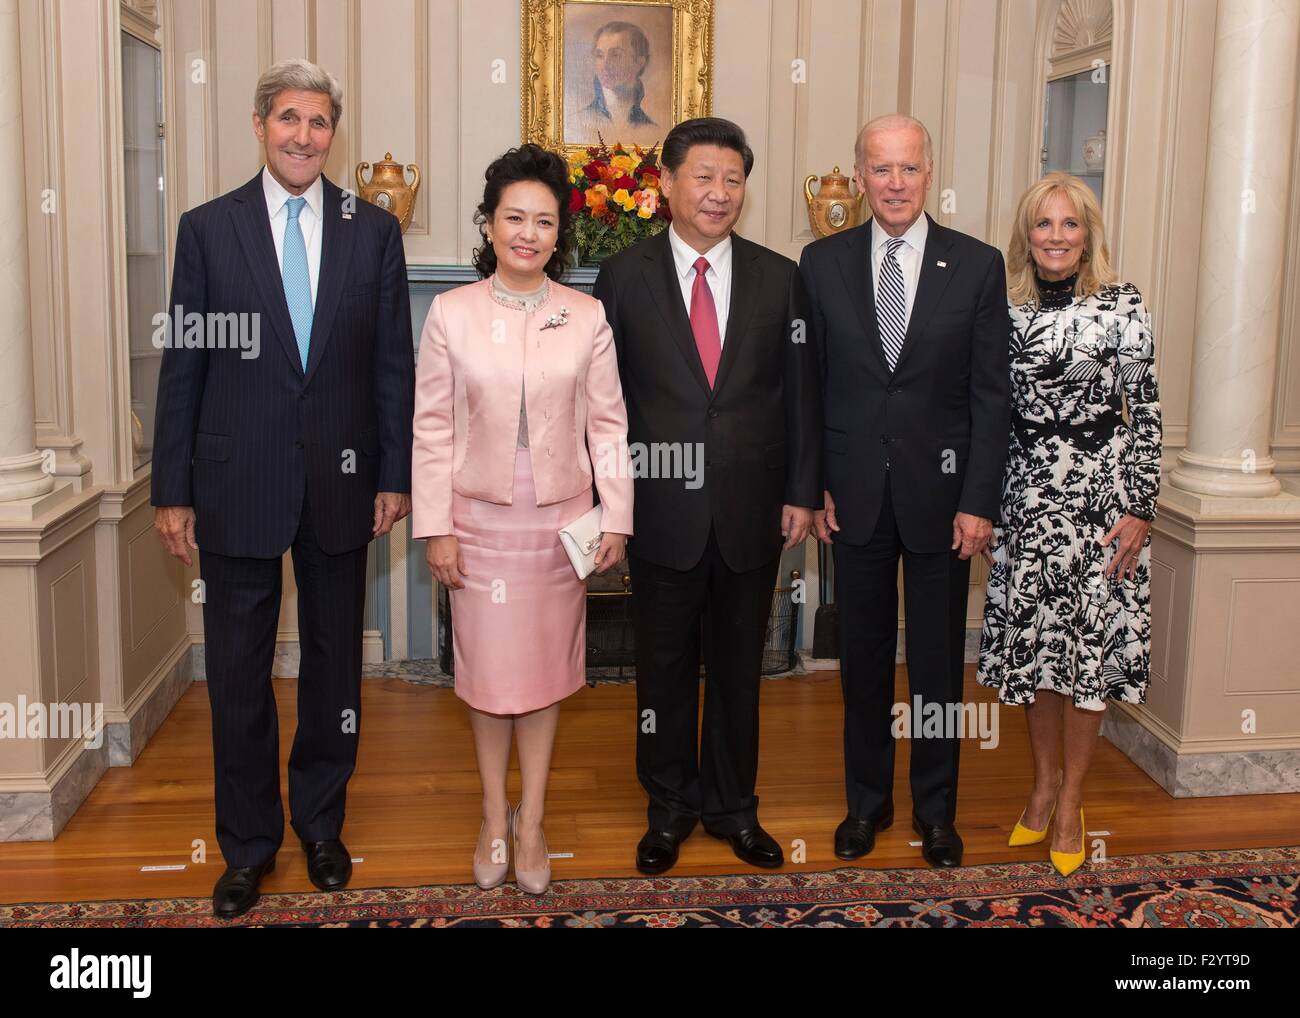 Washington DC, USA. 25th Sep, 2015.  U.S. Vice President Joe Biden and Dr. Jill Biden stand with Chinese President Xi Jinping, his wife Peng Liyuan, and Secretary of State John Kerry before a State Luncheon in the Chinese President's honor at the Department of State September 25, 2015 in Washington, DC. Stock Photo